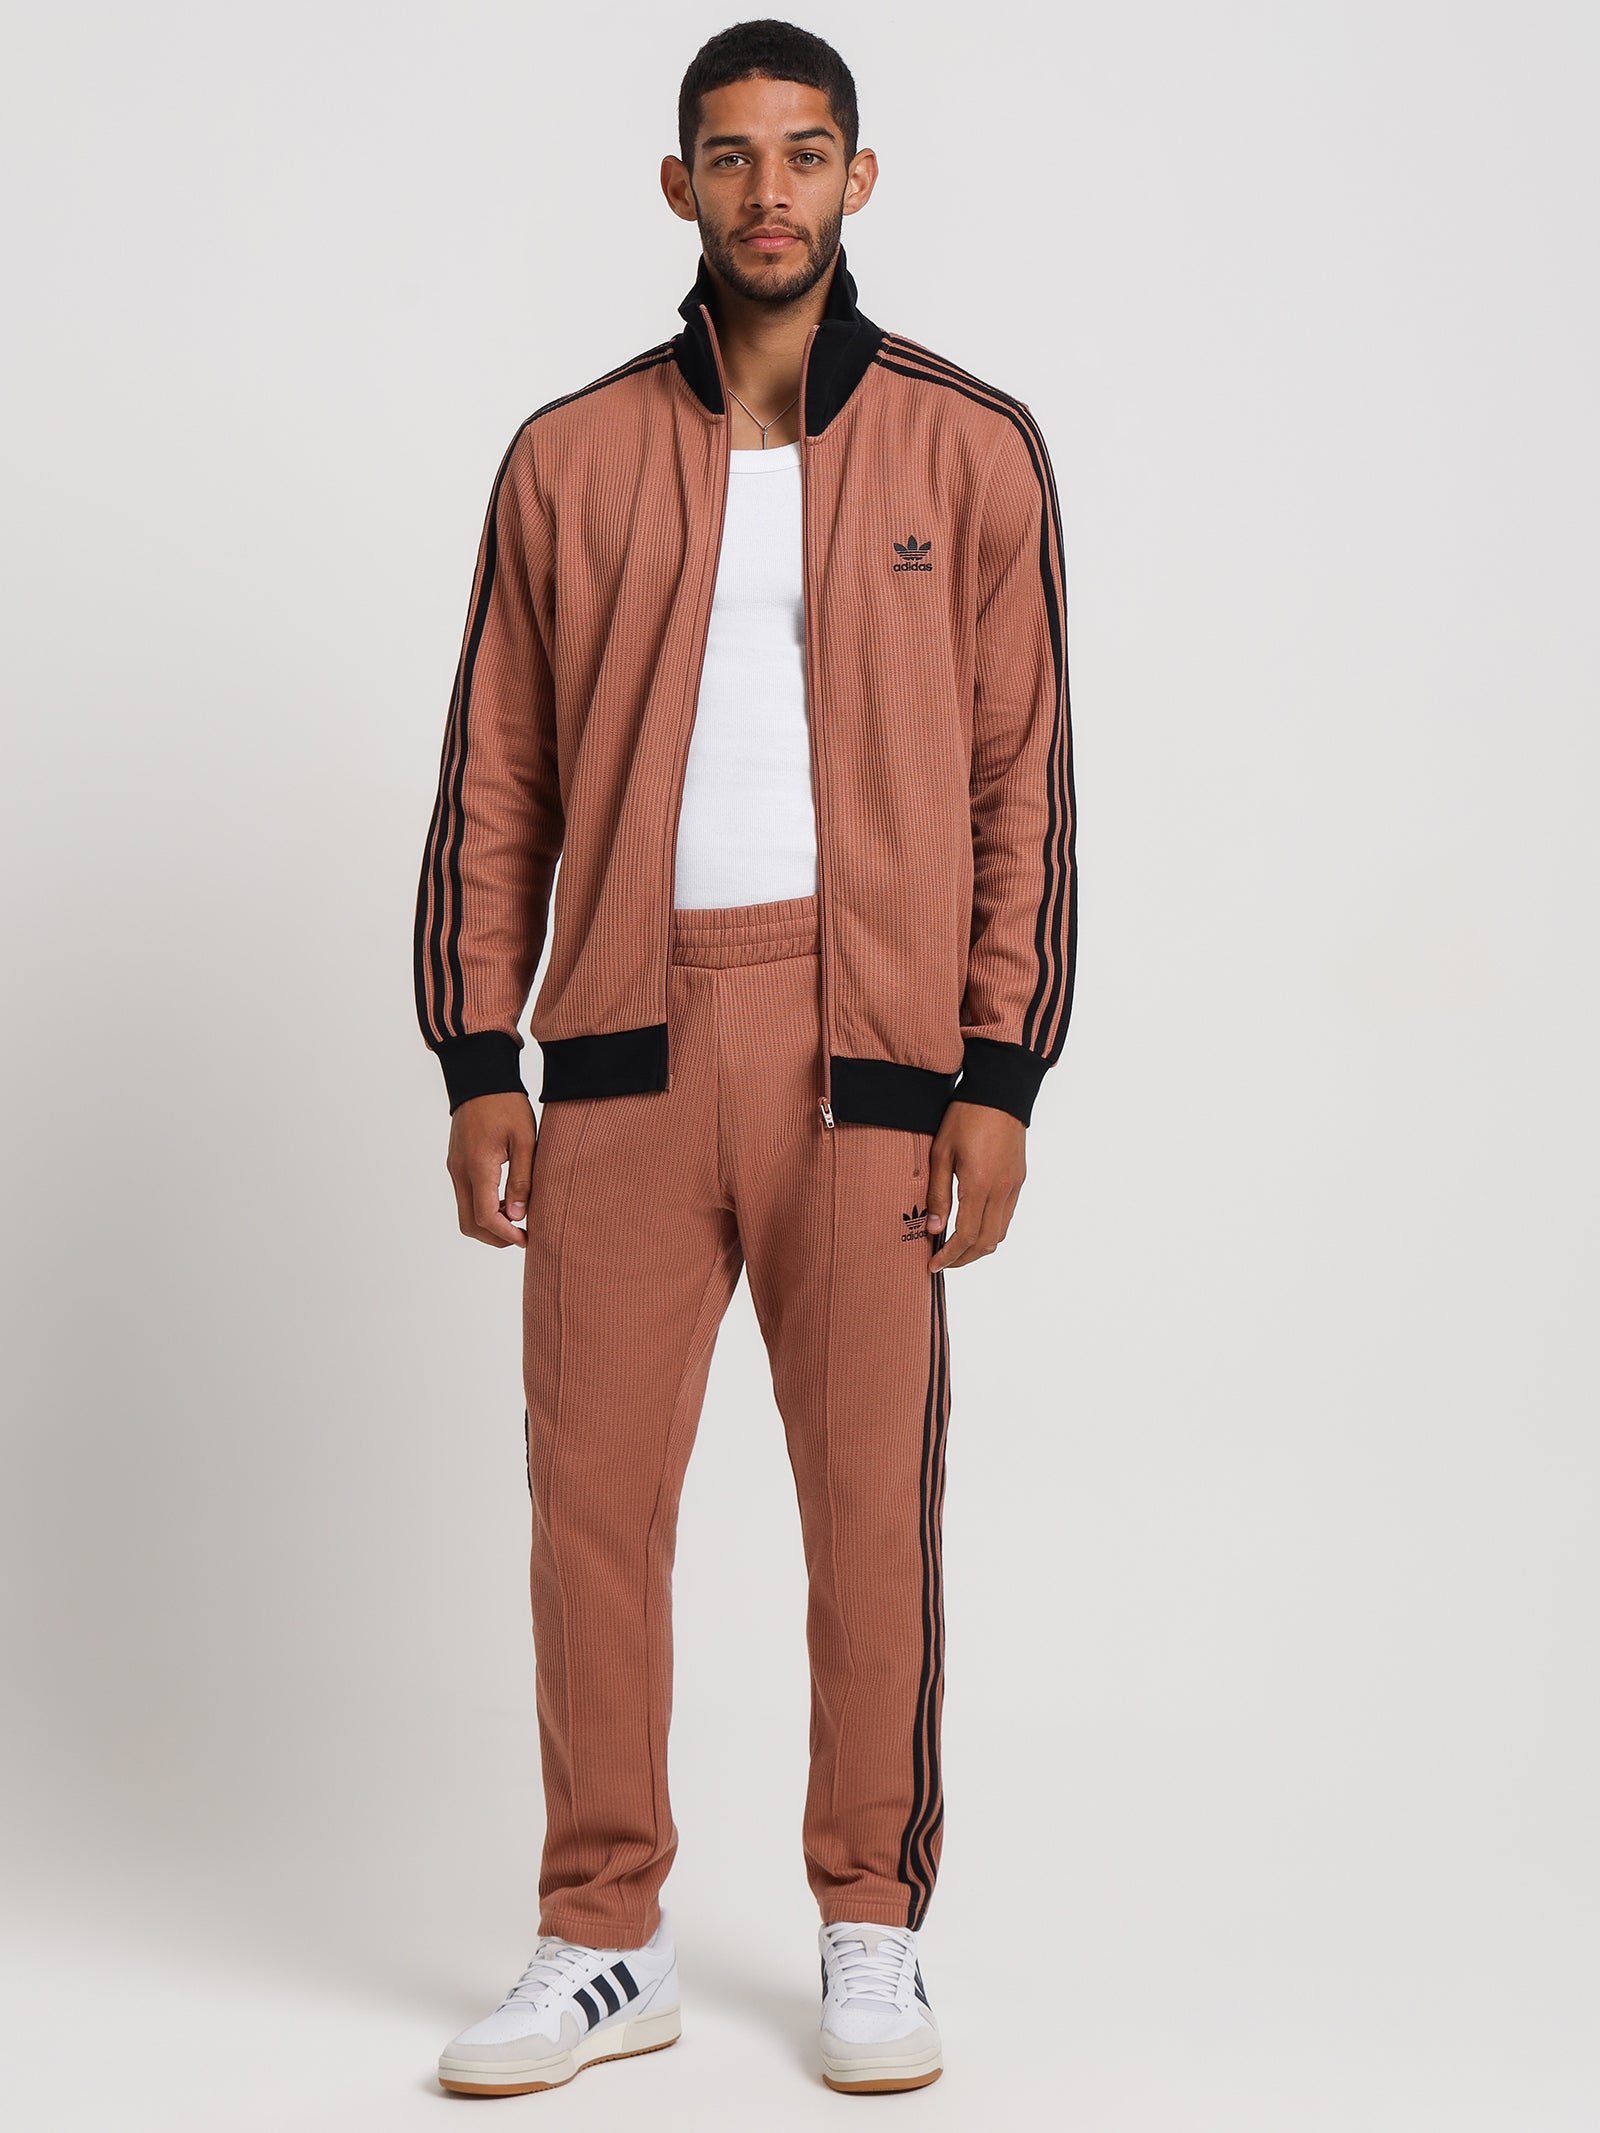 Adicolor Classics Waffle Beckenbauer Track Pants in Clay Strata